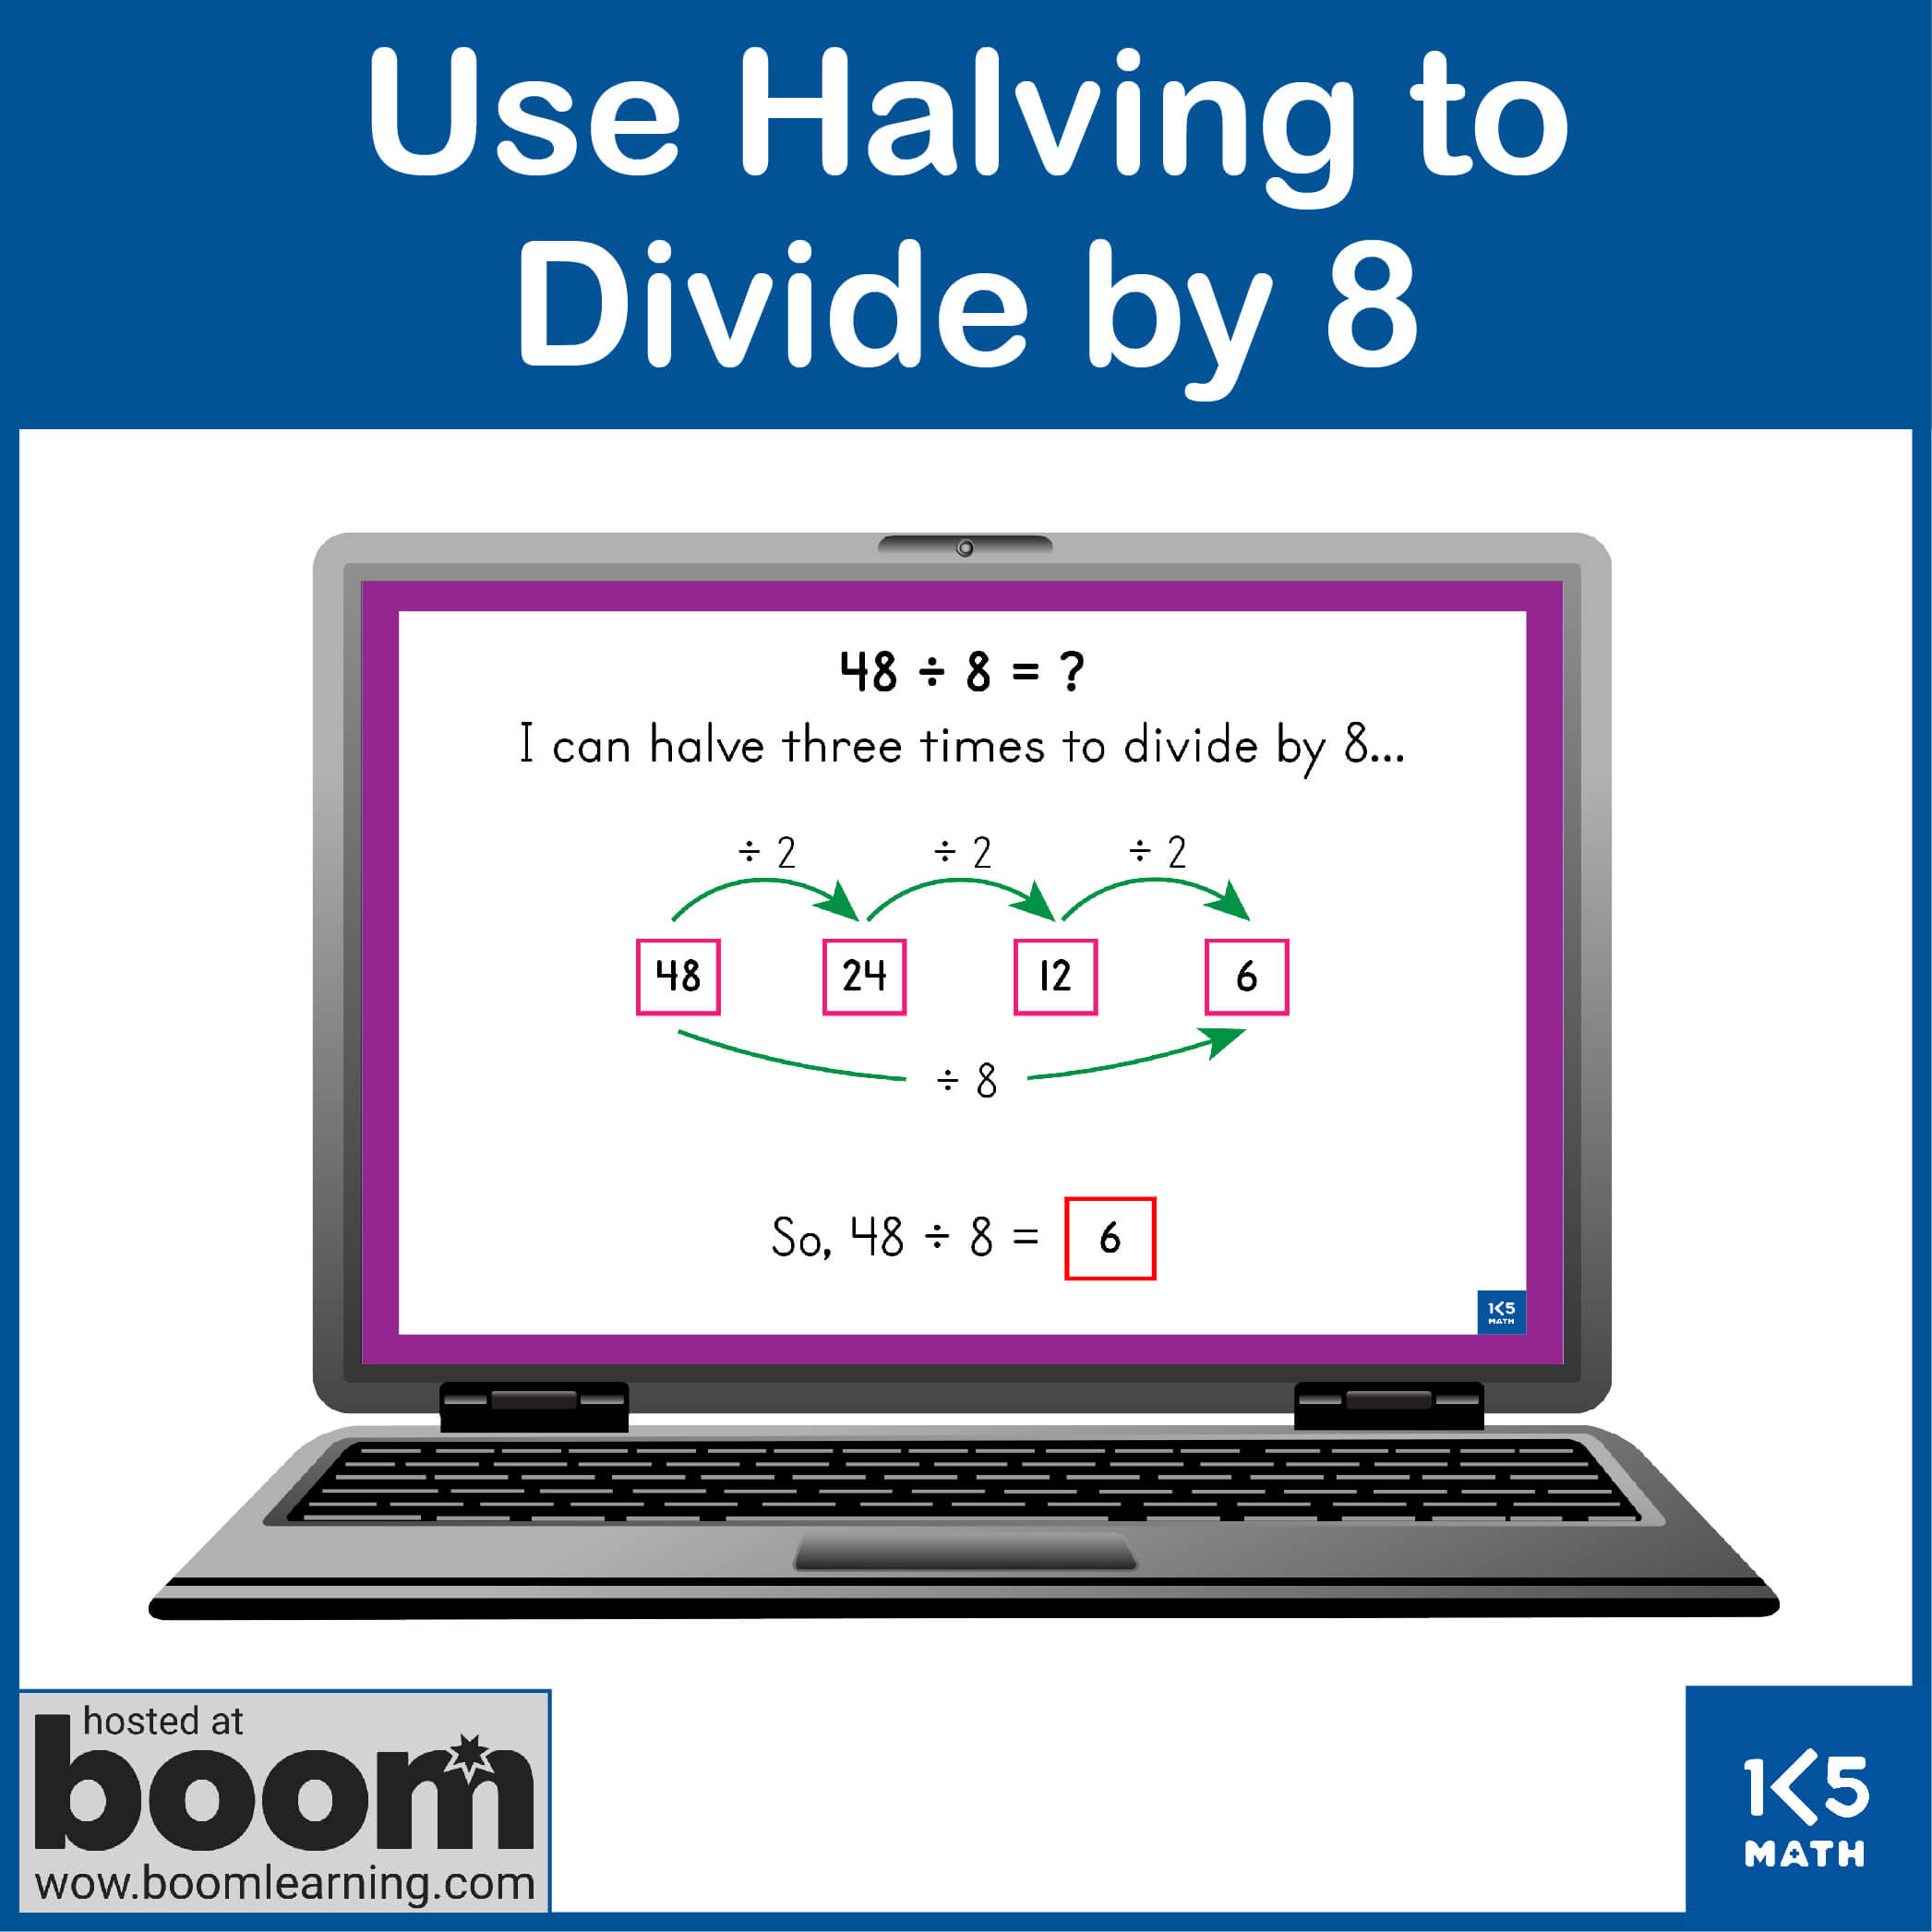 Use Halving to Divide by 8 Boom Cards